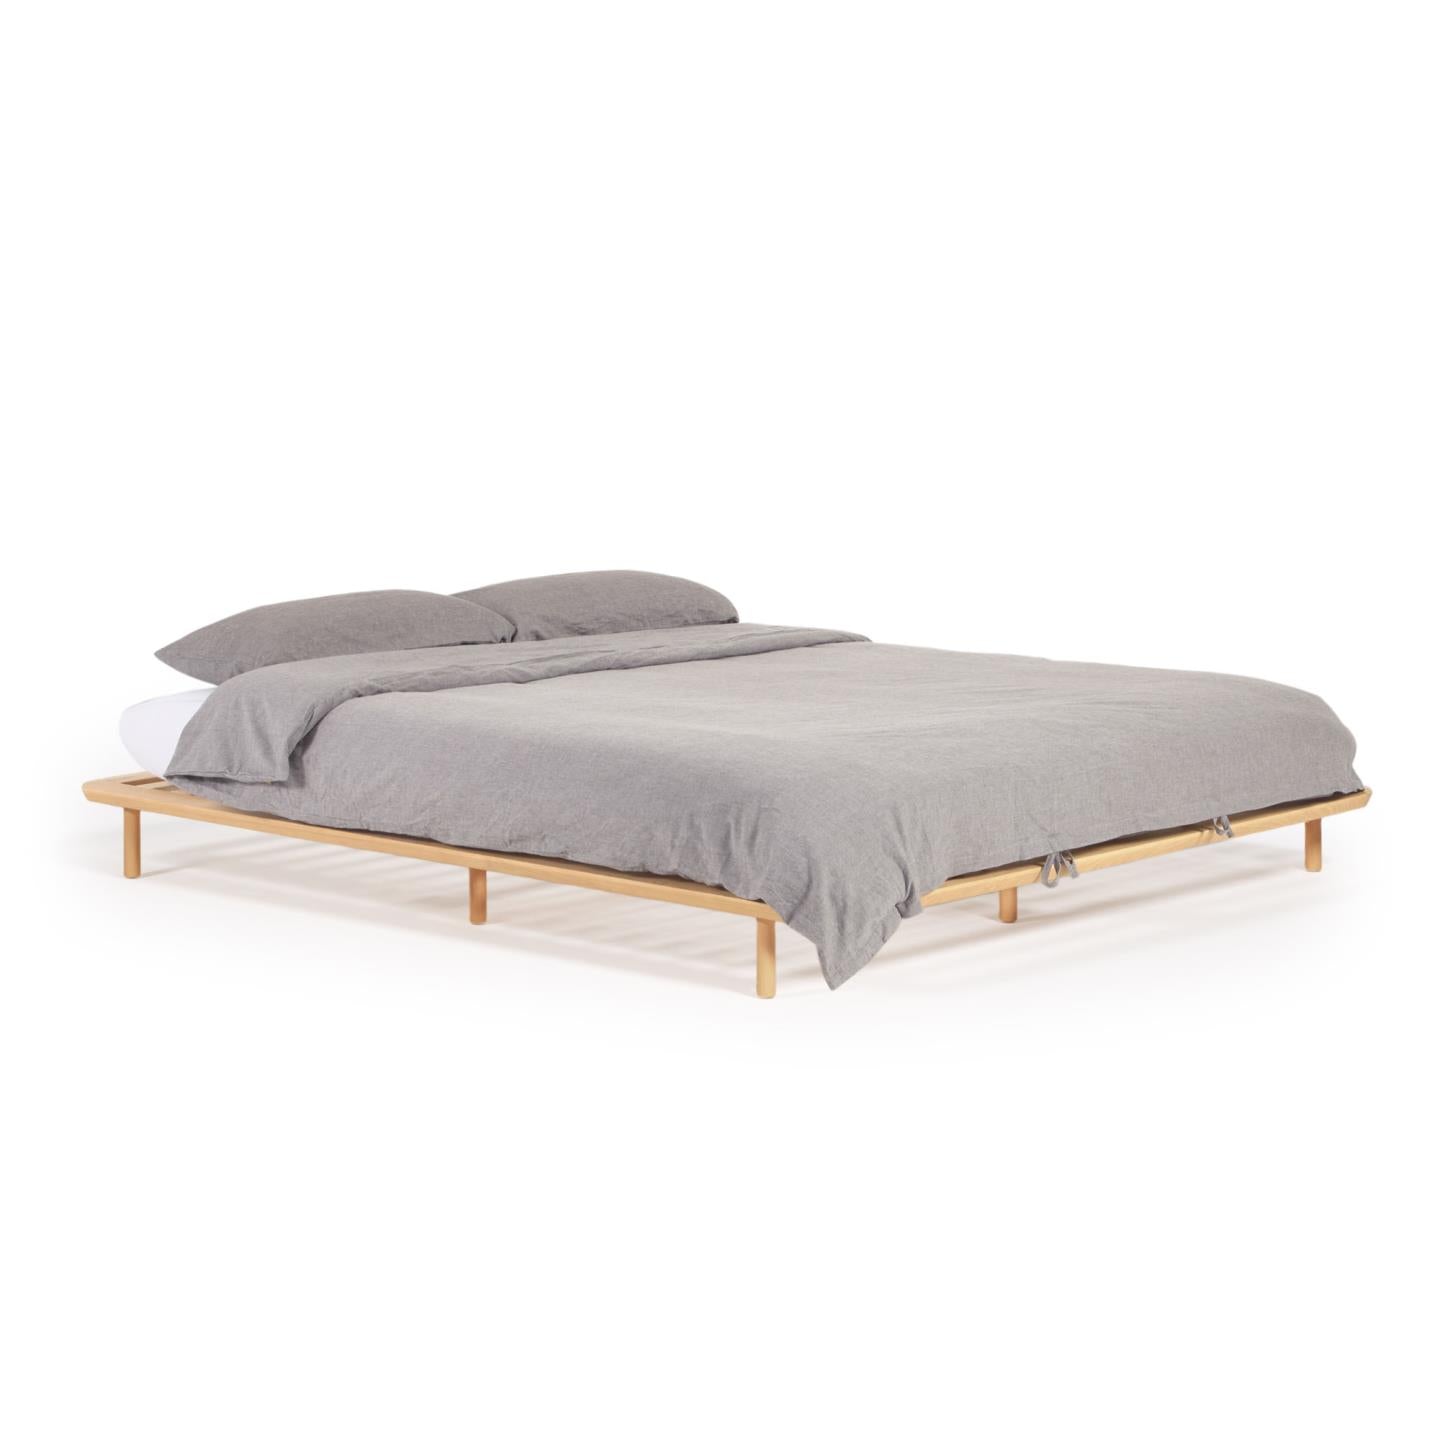 Anielle bed made from solid ash wood for a 160 x 200 cm mattress